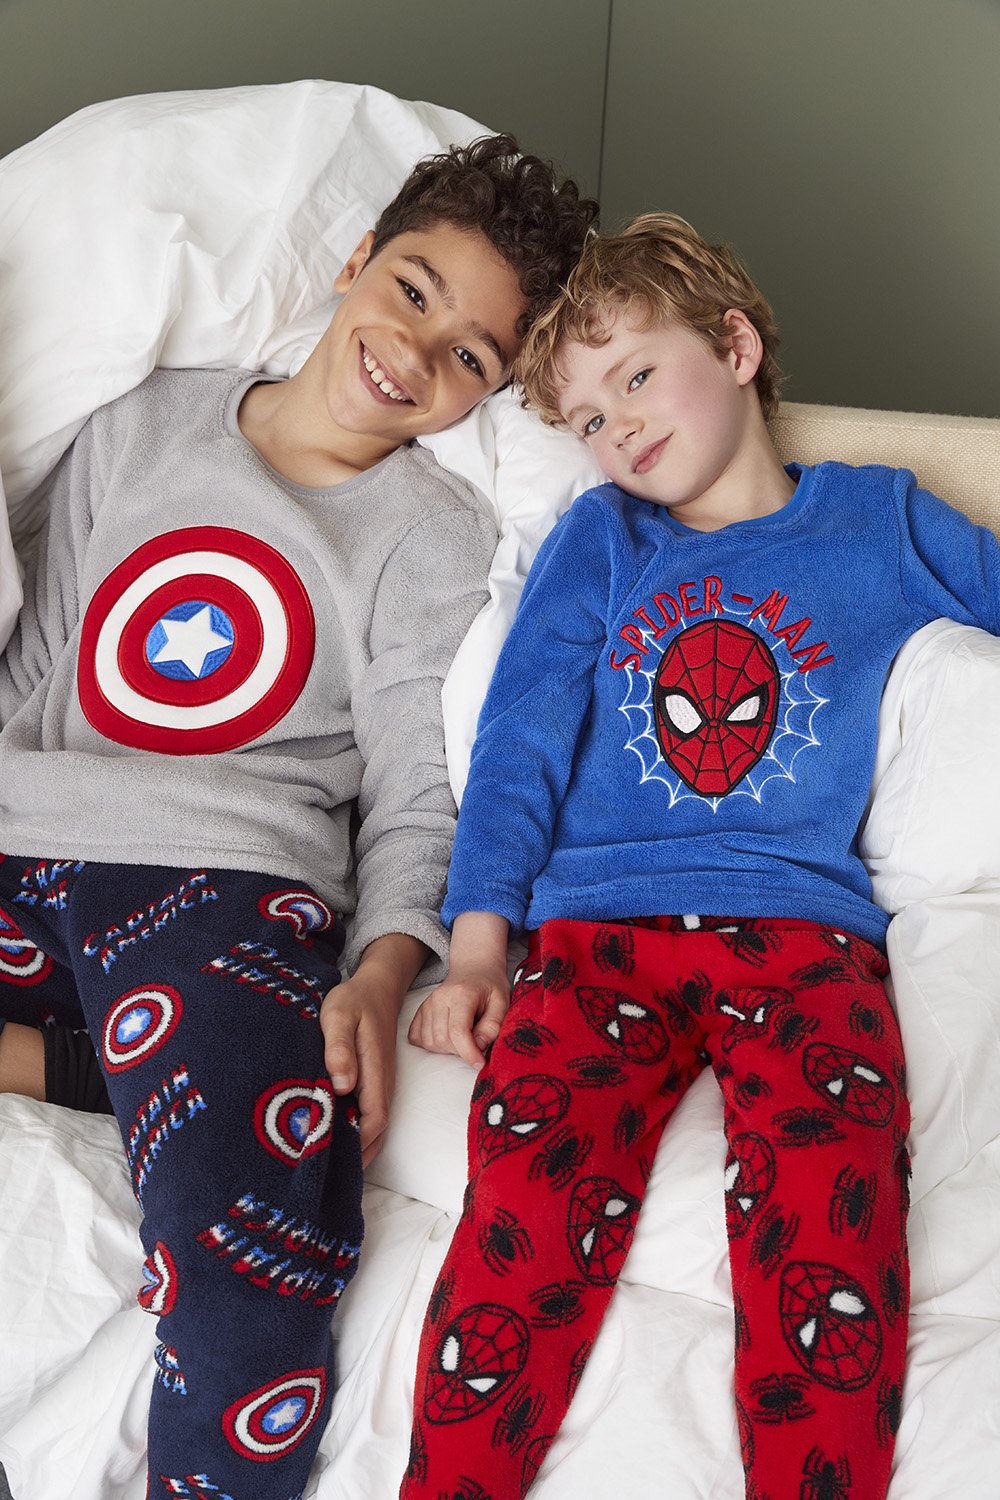 Primark on Twitter: "Here's a tough one: Captain America or Spiderman? 🇺🇸🕷 #Primark #kidswear https://t.co/c7w7iW78W5" / Twitter